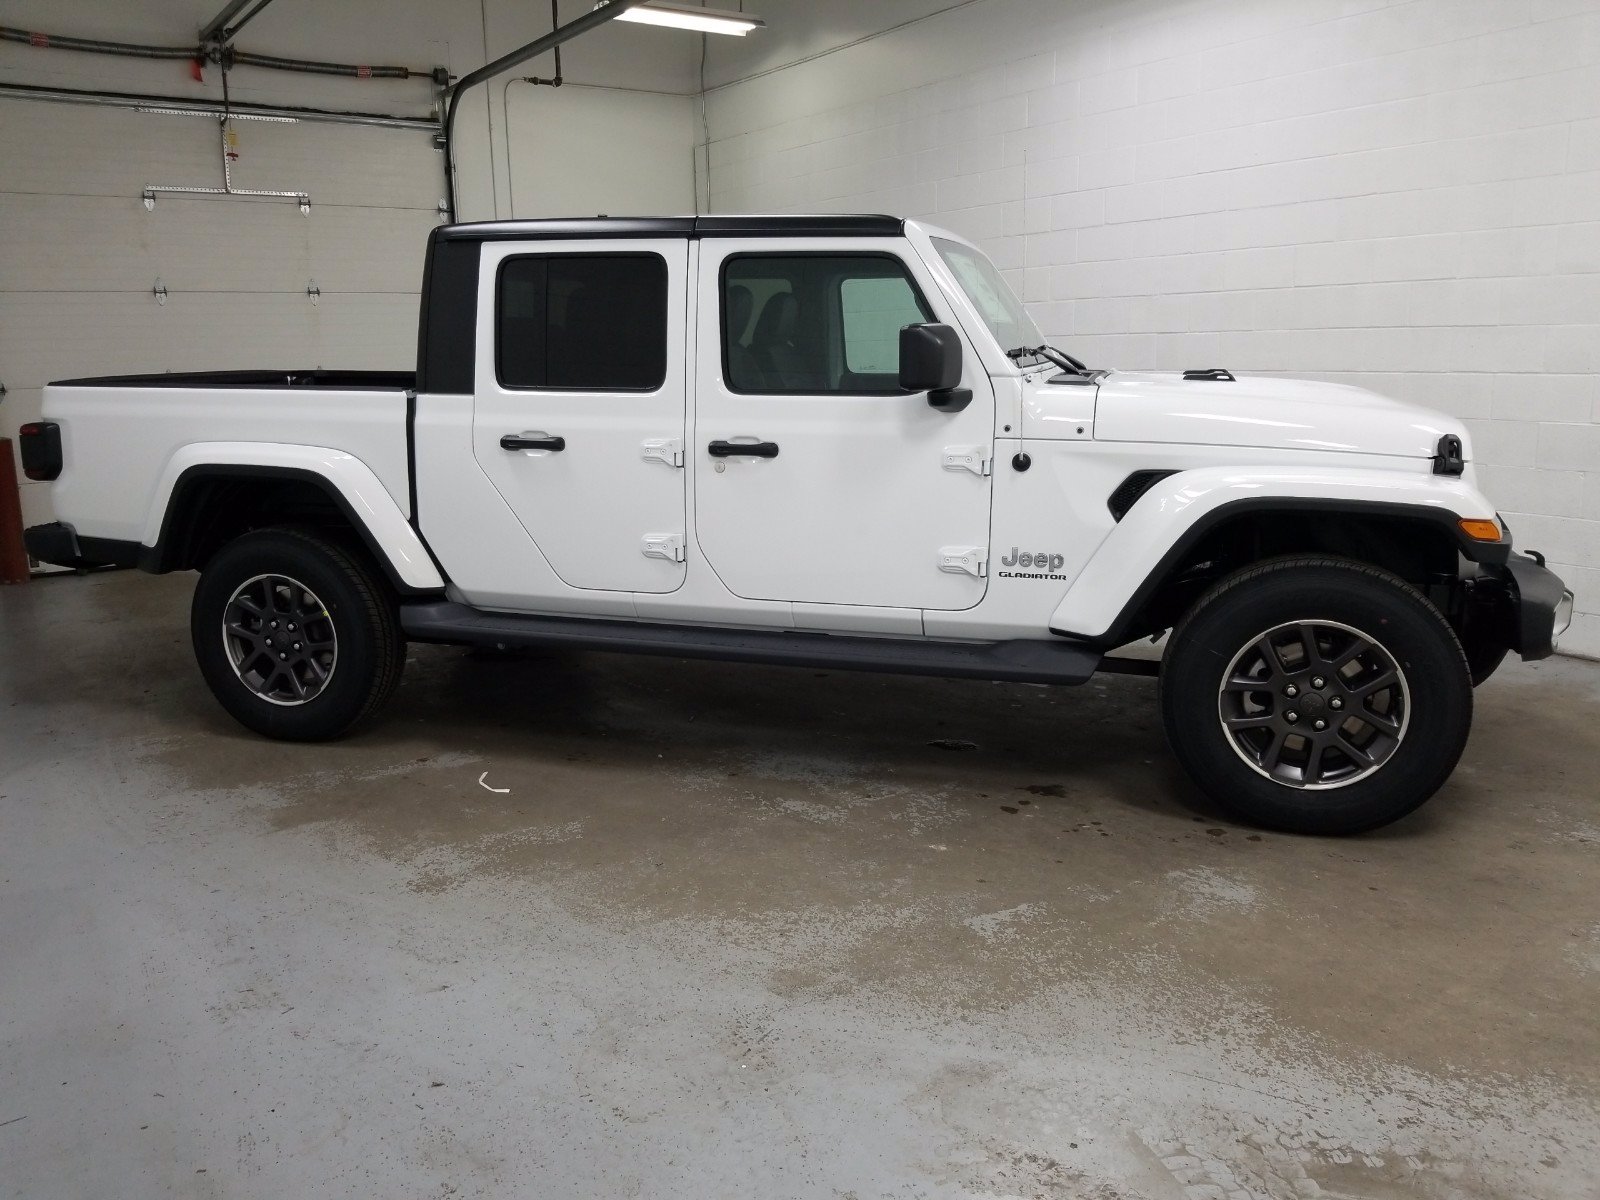 2021 jeep gladiator overland New 2020 jeep gladiator overland crew cab in longview #20d251